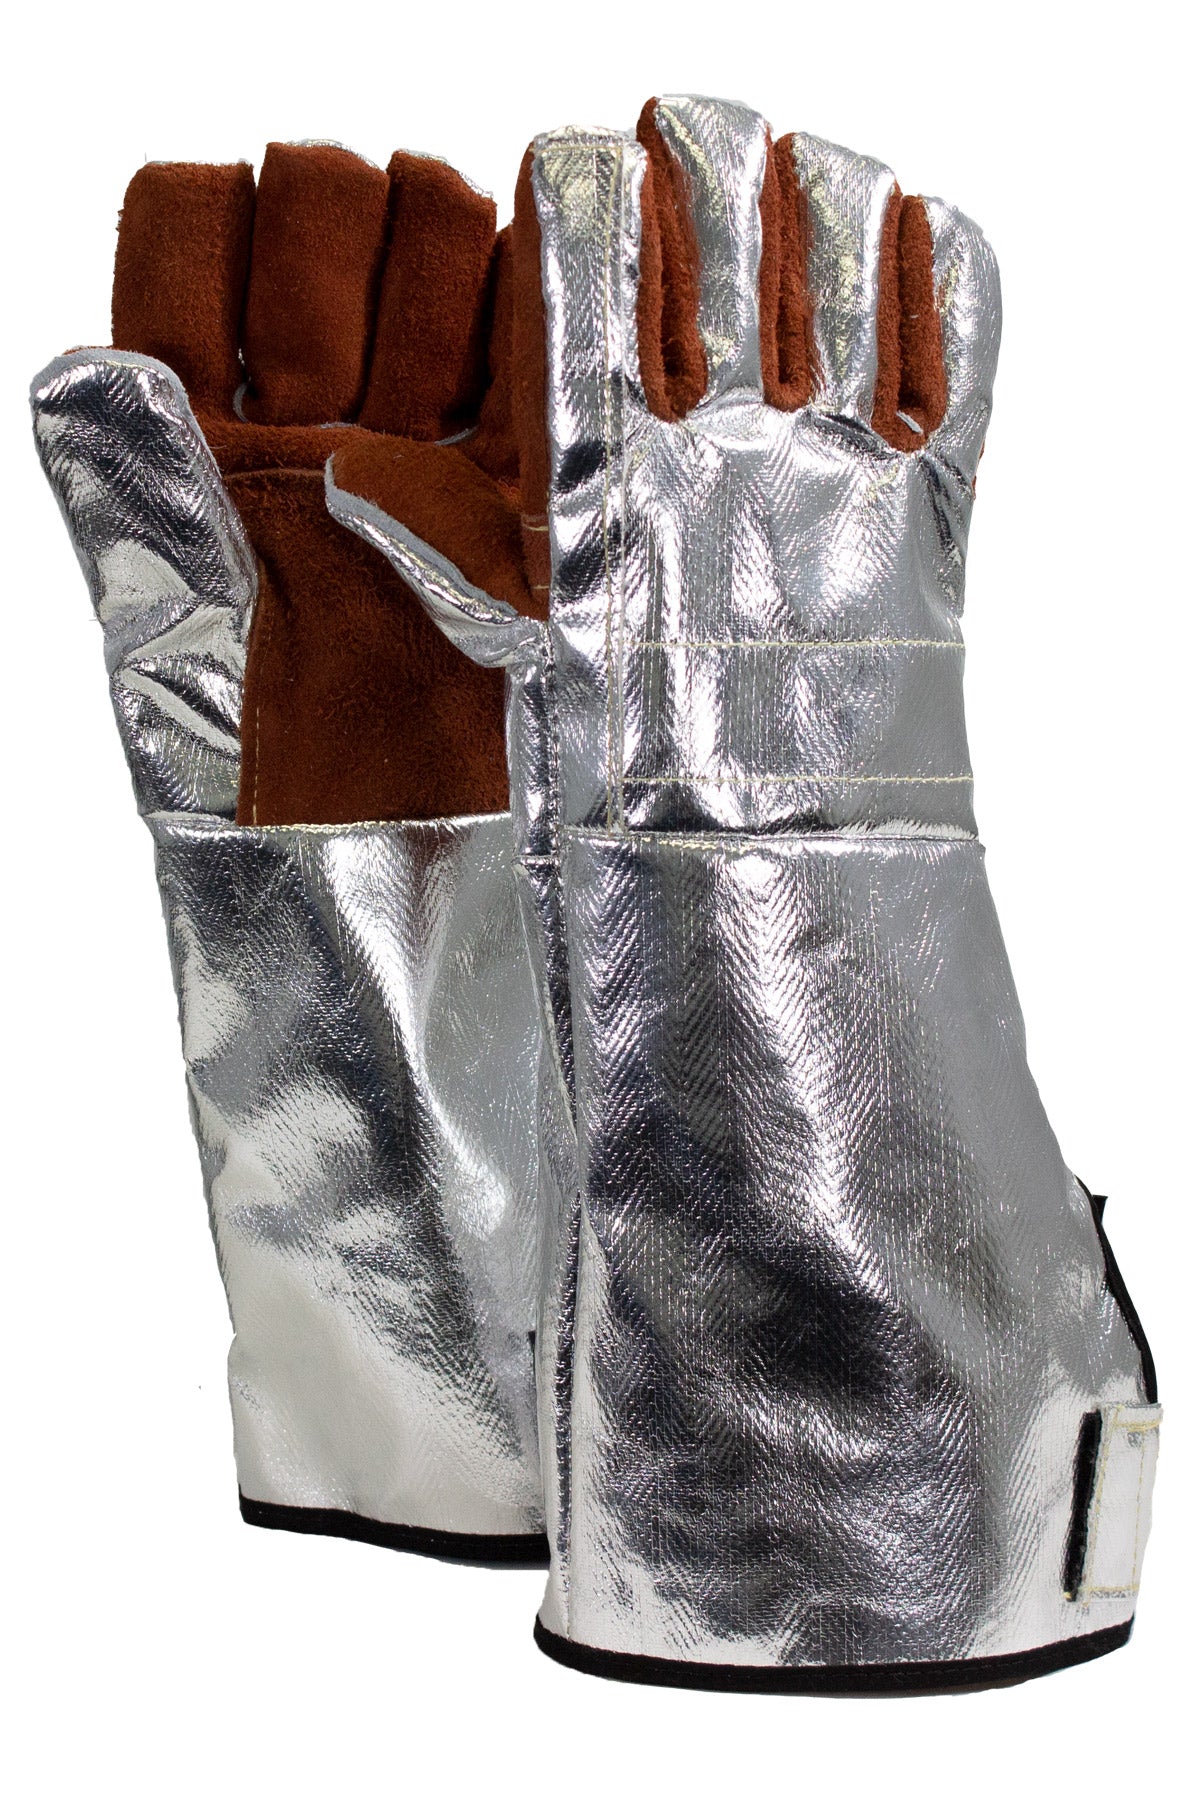 Aluminized Extreme Heat Glove with Leather Palm